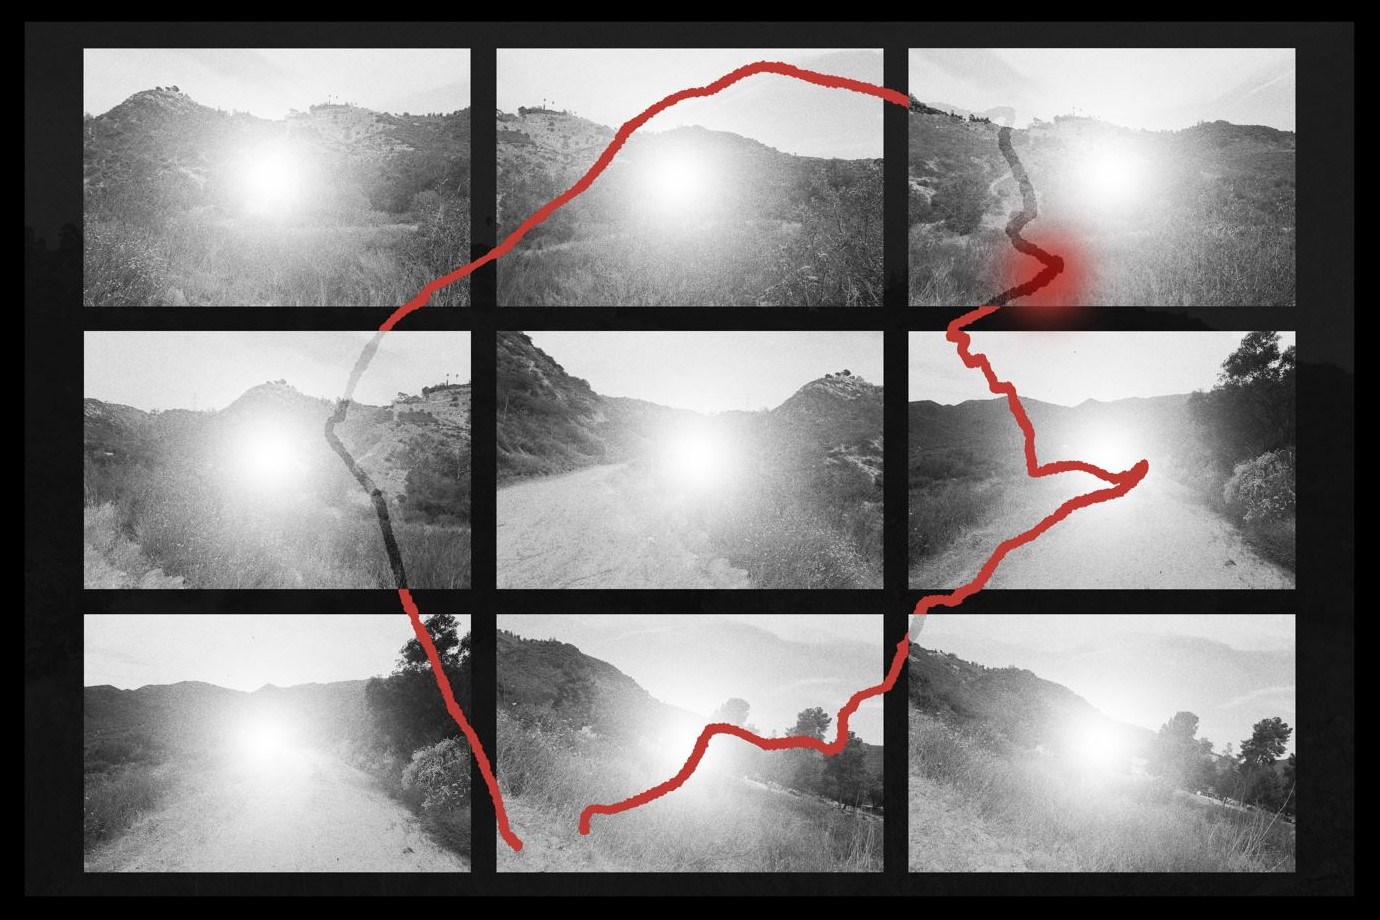 An illustration composed of nine black-and-white squares that include images of the Lippe Hike, overlaid with a red outline of the trail.